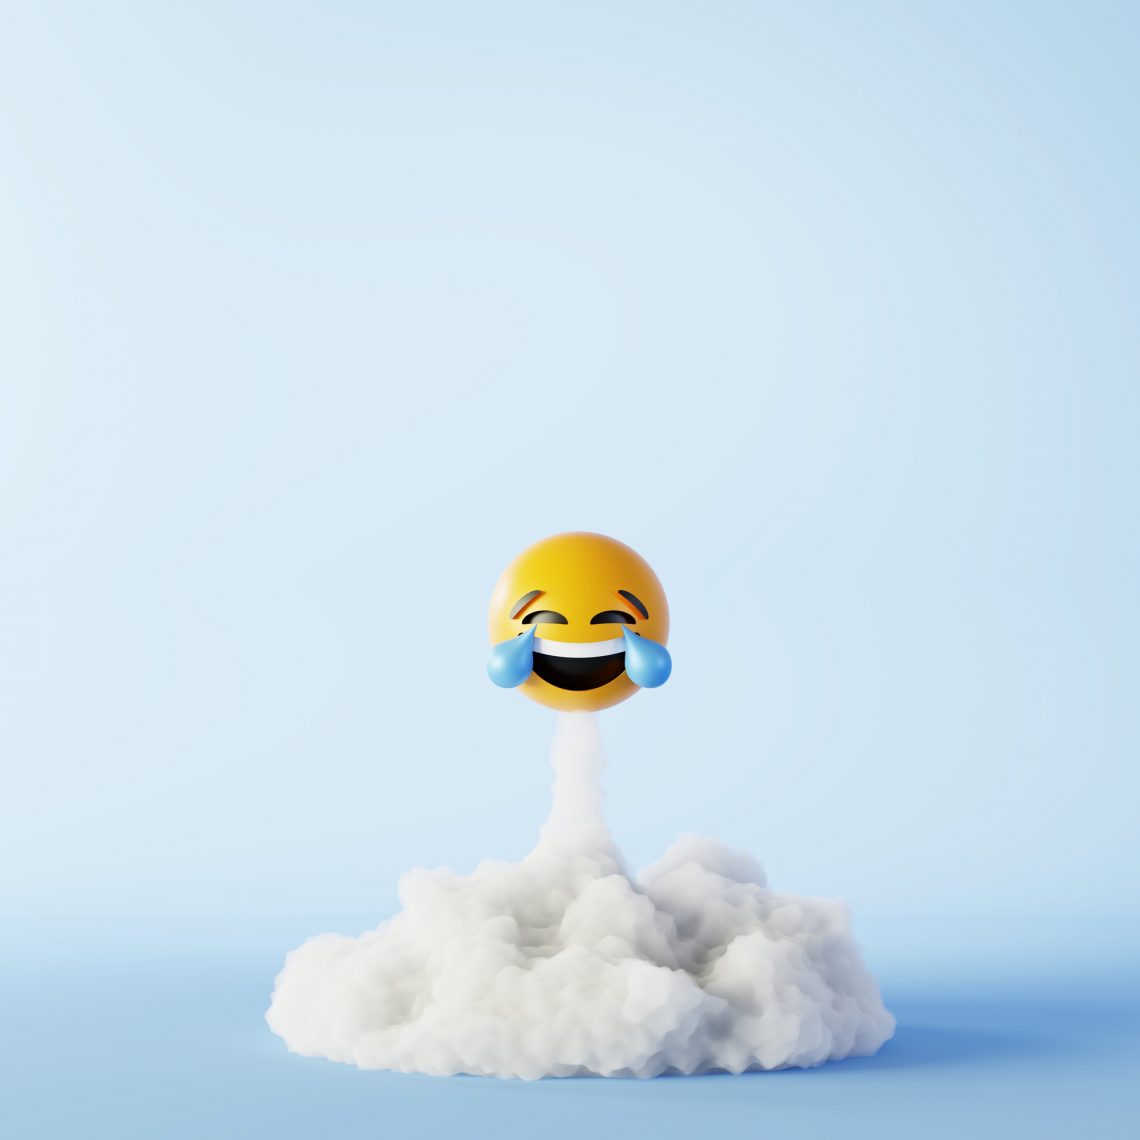 Happy and laughing emoticons 3d rendering background, social med